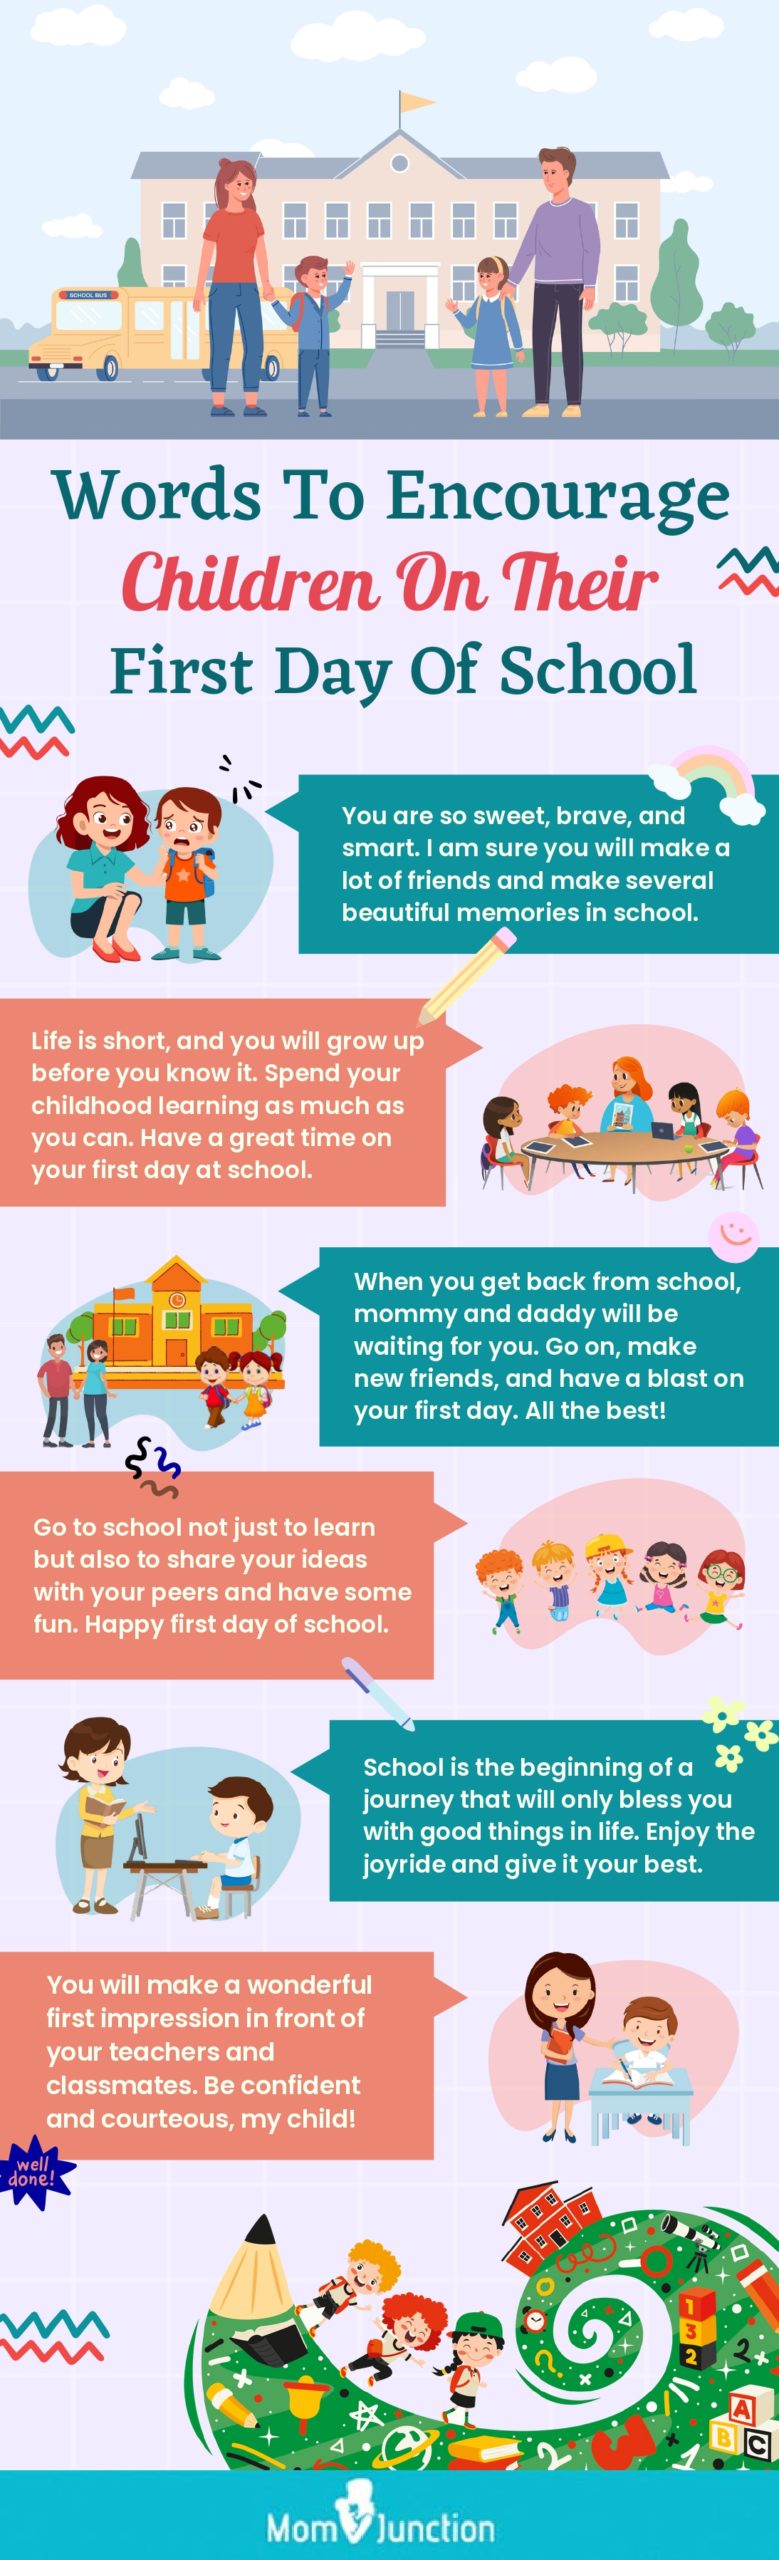 words to encourage children on their first day of school (infographic)